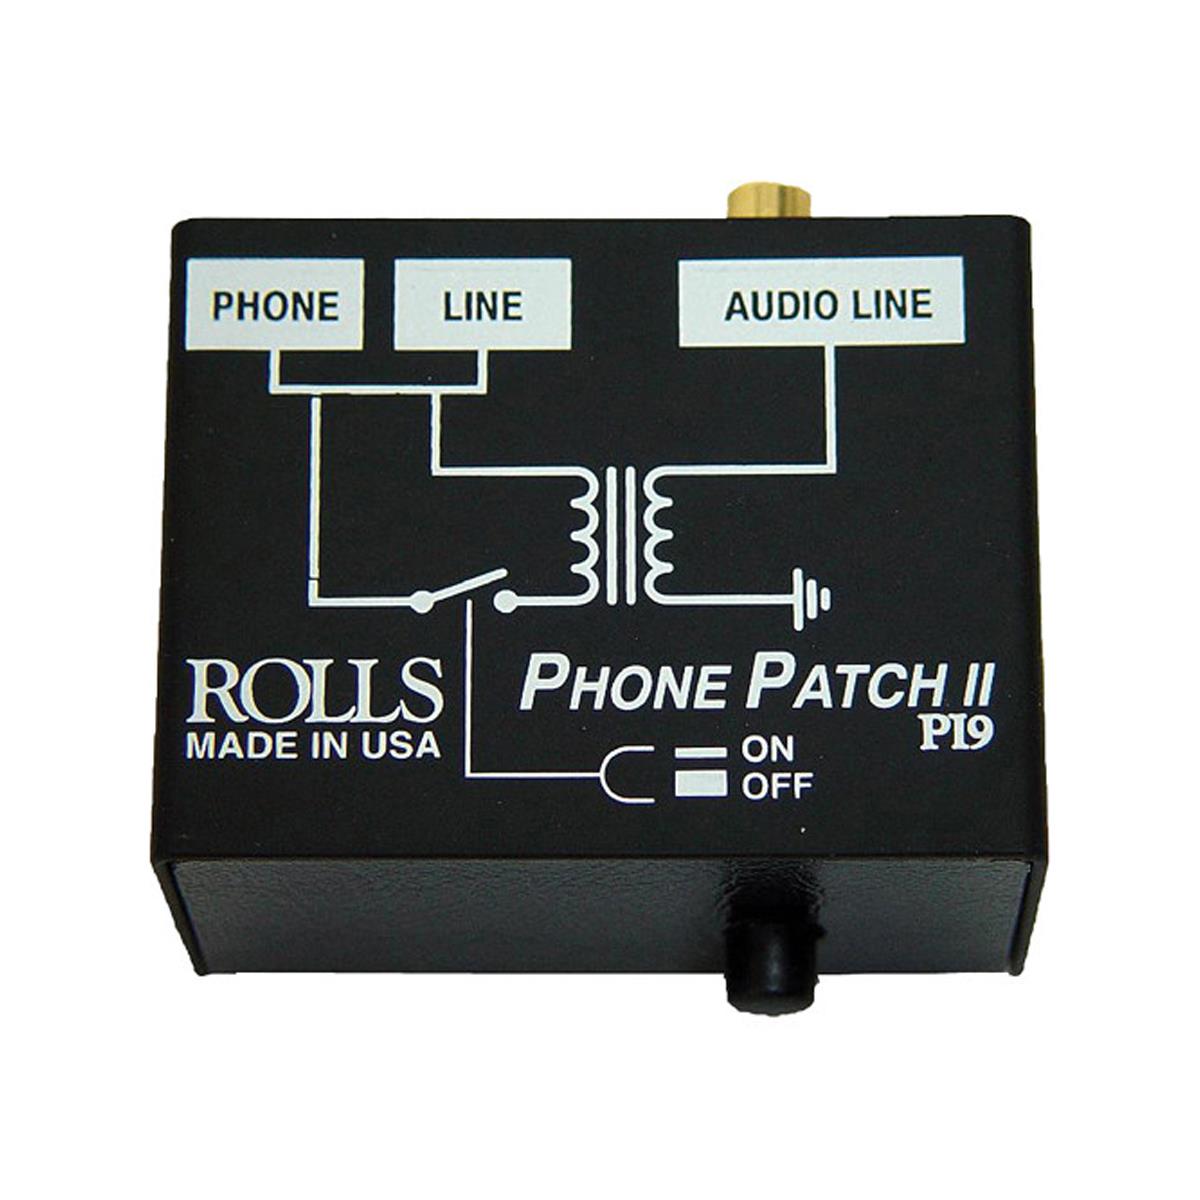 Image of Rolls PI9 Phone Patch II Telephone Output Adapter